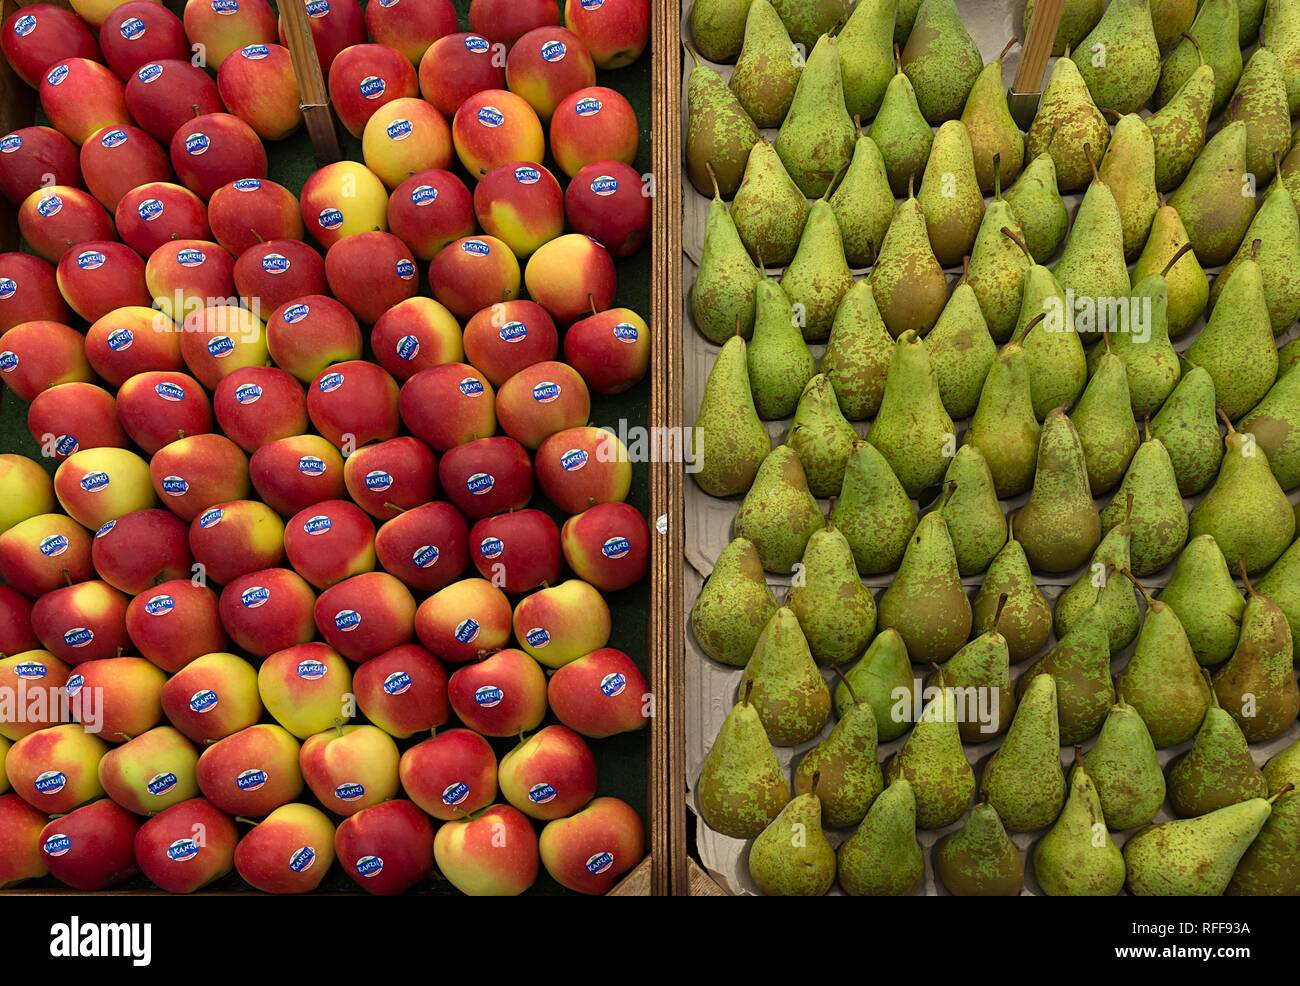 Apples (Malus) and Pears (Pyrus) in boxes at a fruit stall, Netherlands Stock Photo